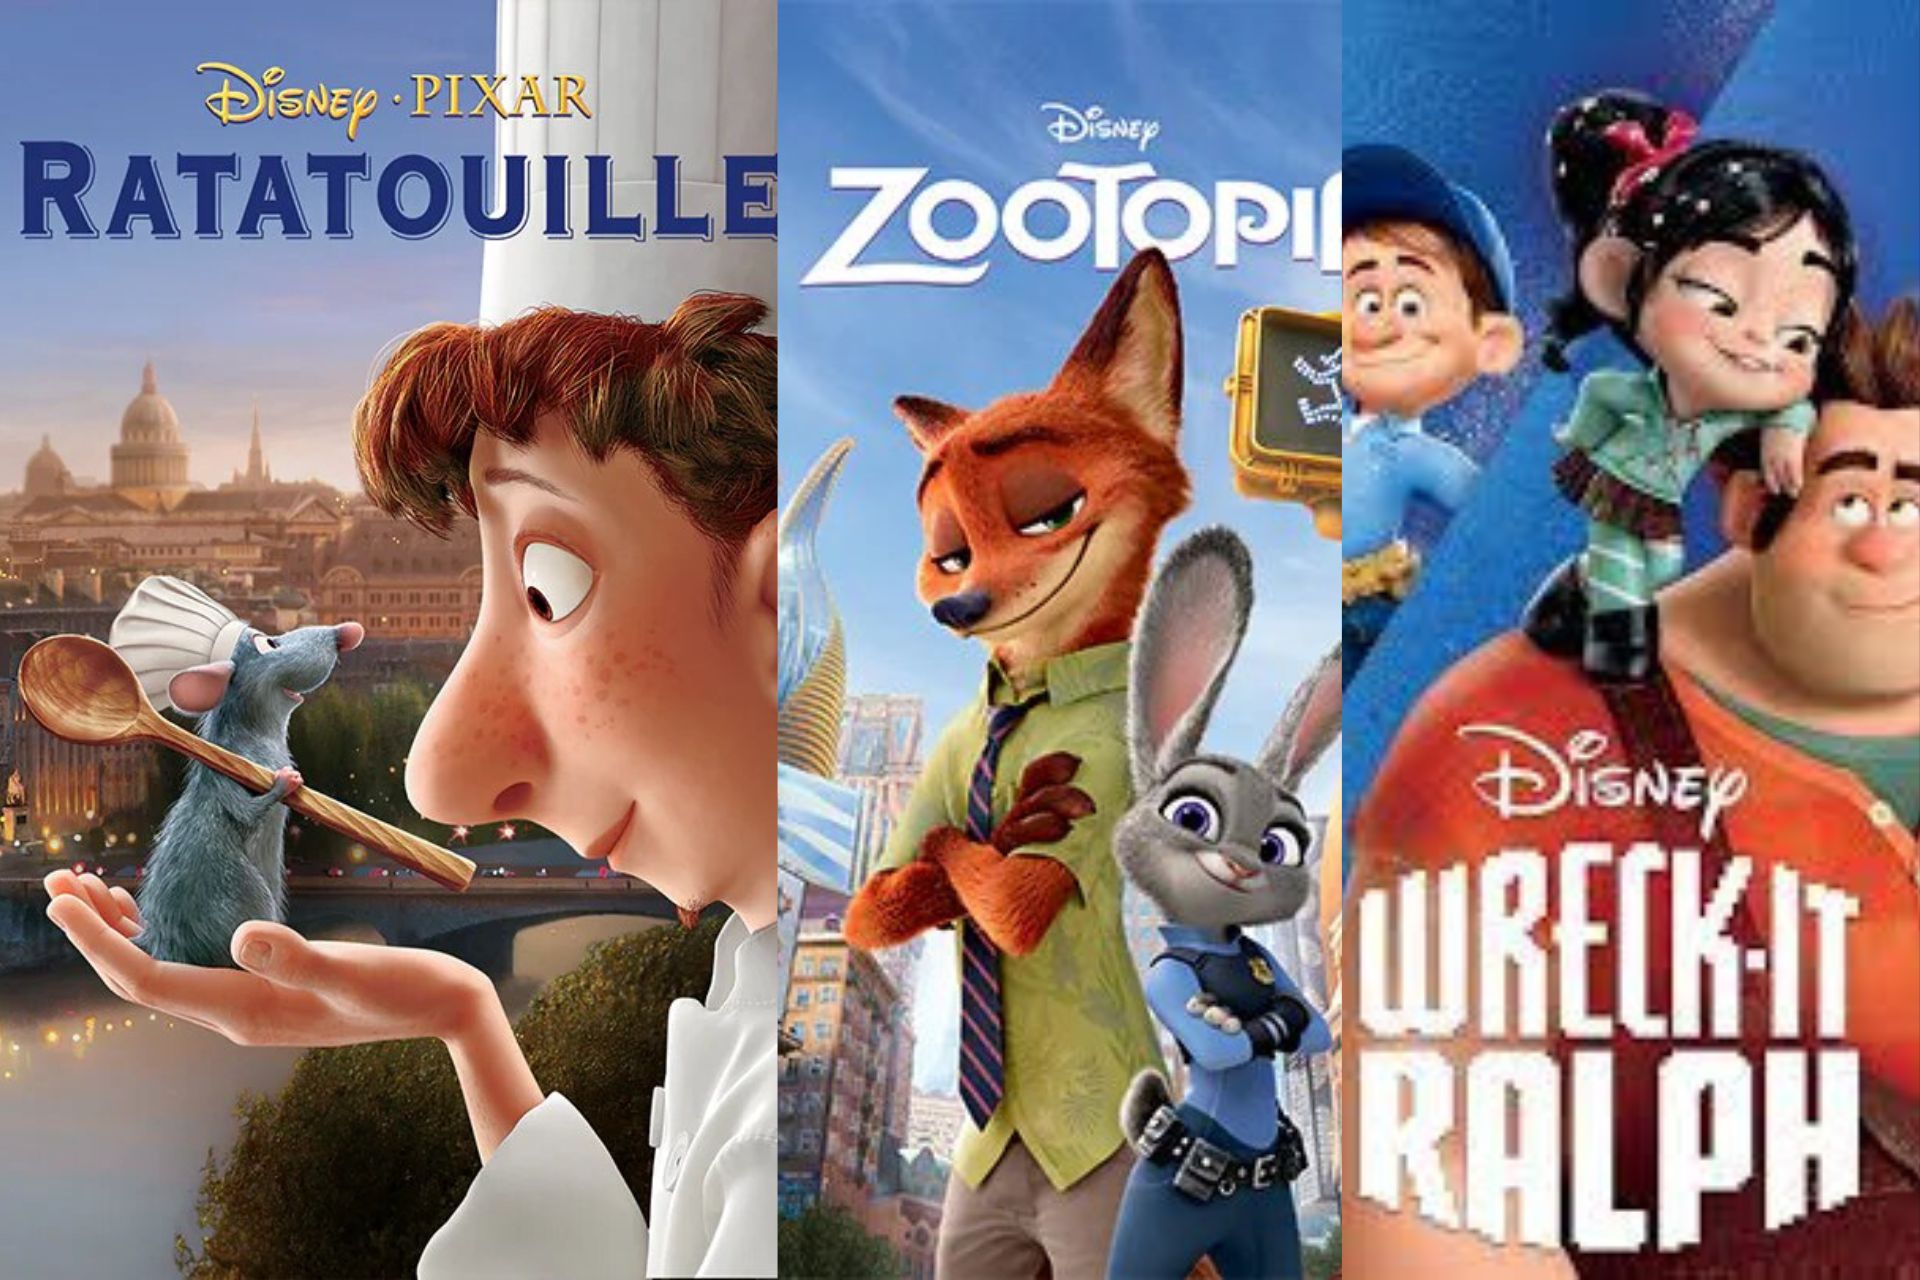 new disney movies rated g